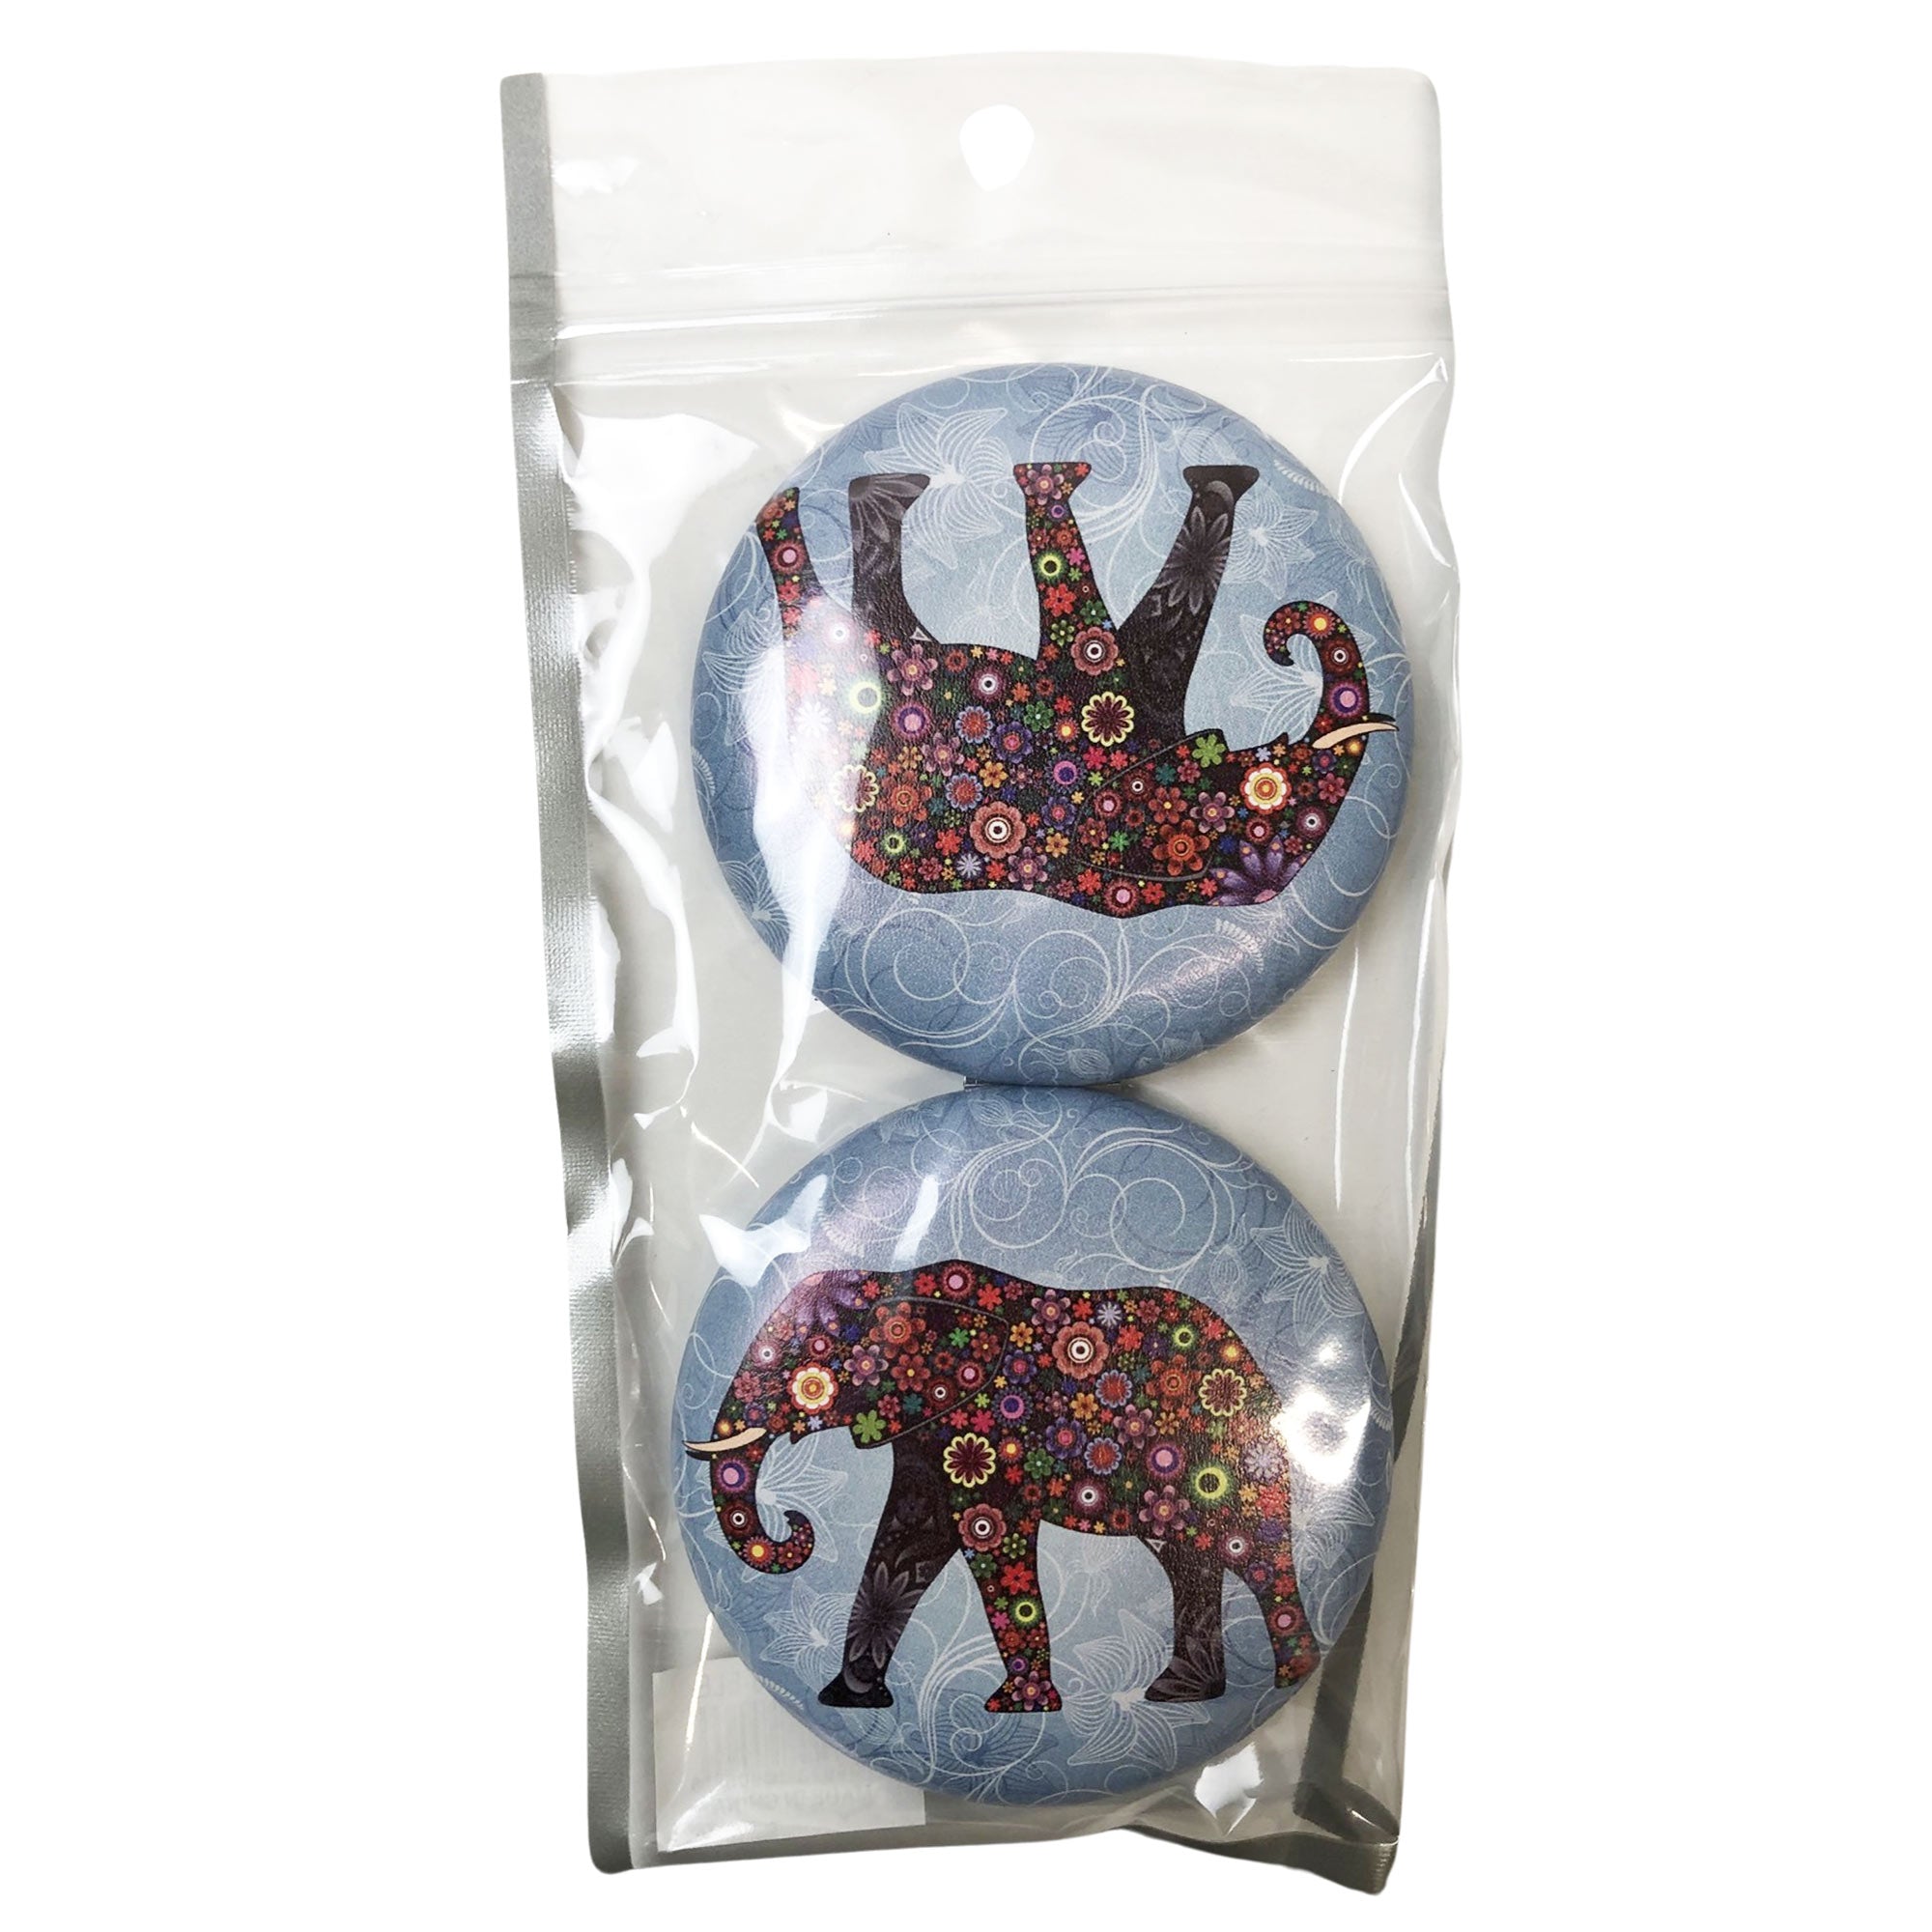 CLEARANCE COSMETIC MIRRORS ELEPHANT PRINTS (CASE OF 48 - $1.50 / PIECE)  Wholesale Round Cosmetic Mirrors in Assorted Prints SKU: 906-ELE-48